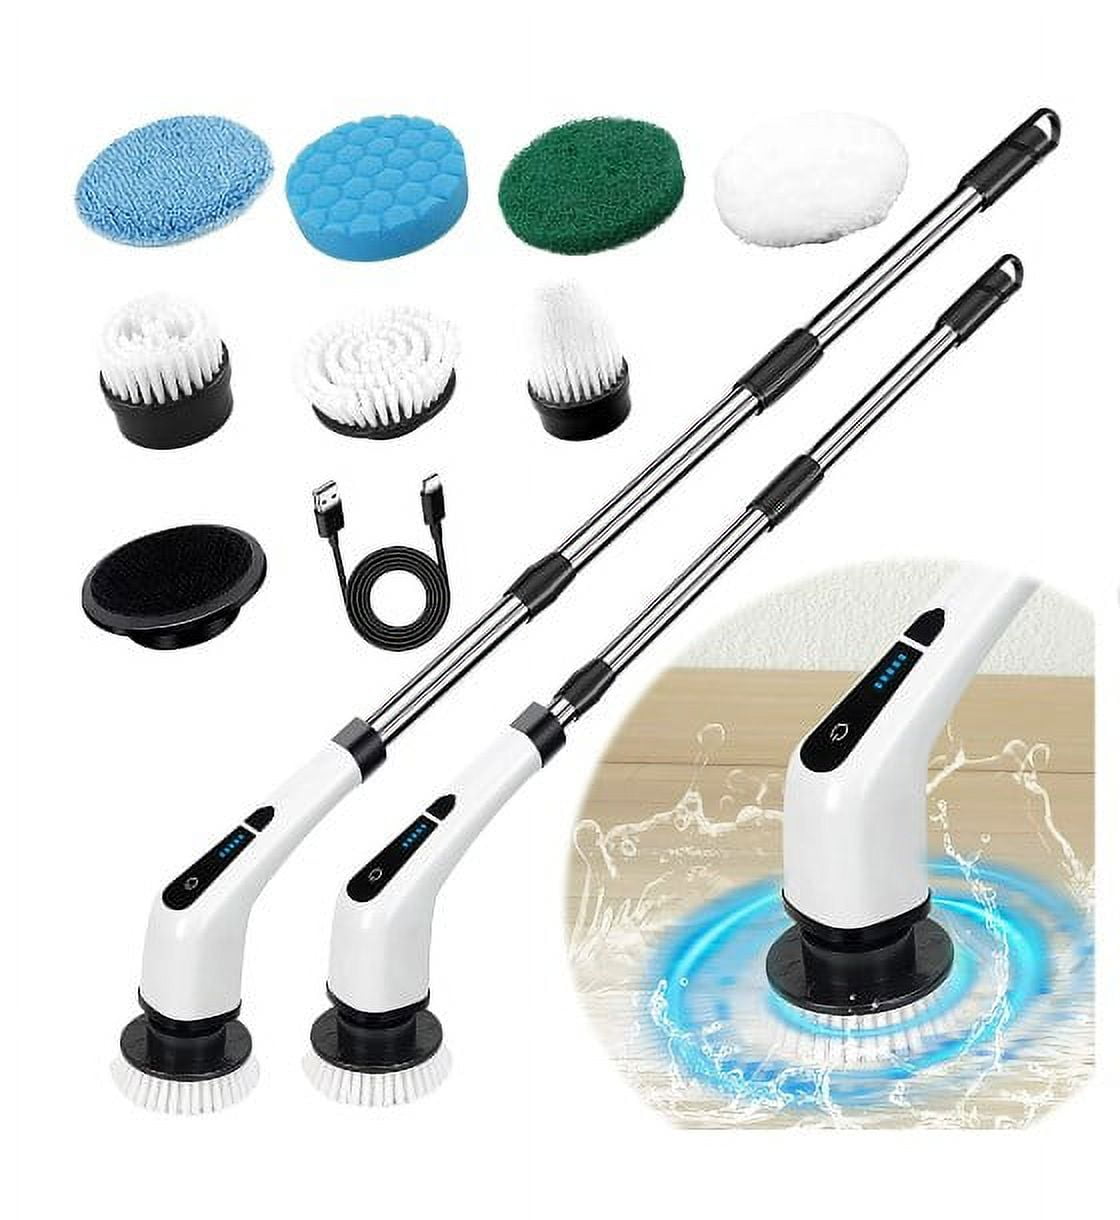 Electric Spin Scrubber, Cordless Bath Tub Power Scrubber 8in1, Deep Cleaning, Shower Cleaning Brush Household Tools for Bathroom & Tile Floor, Size